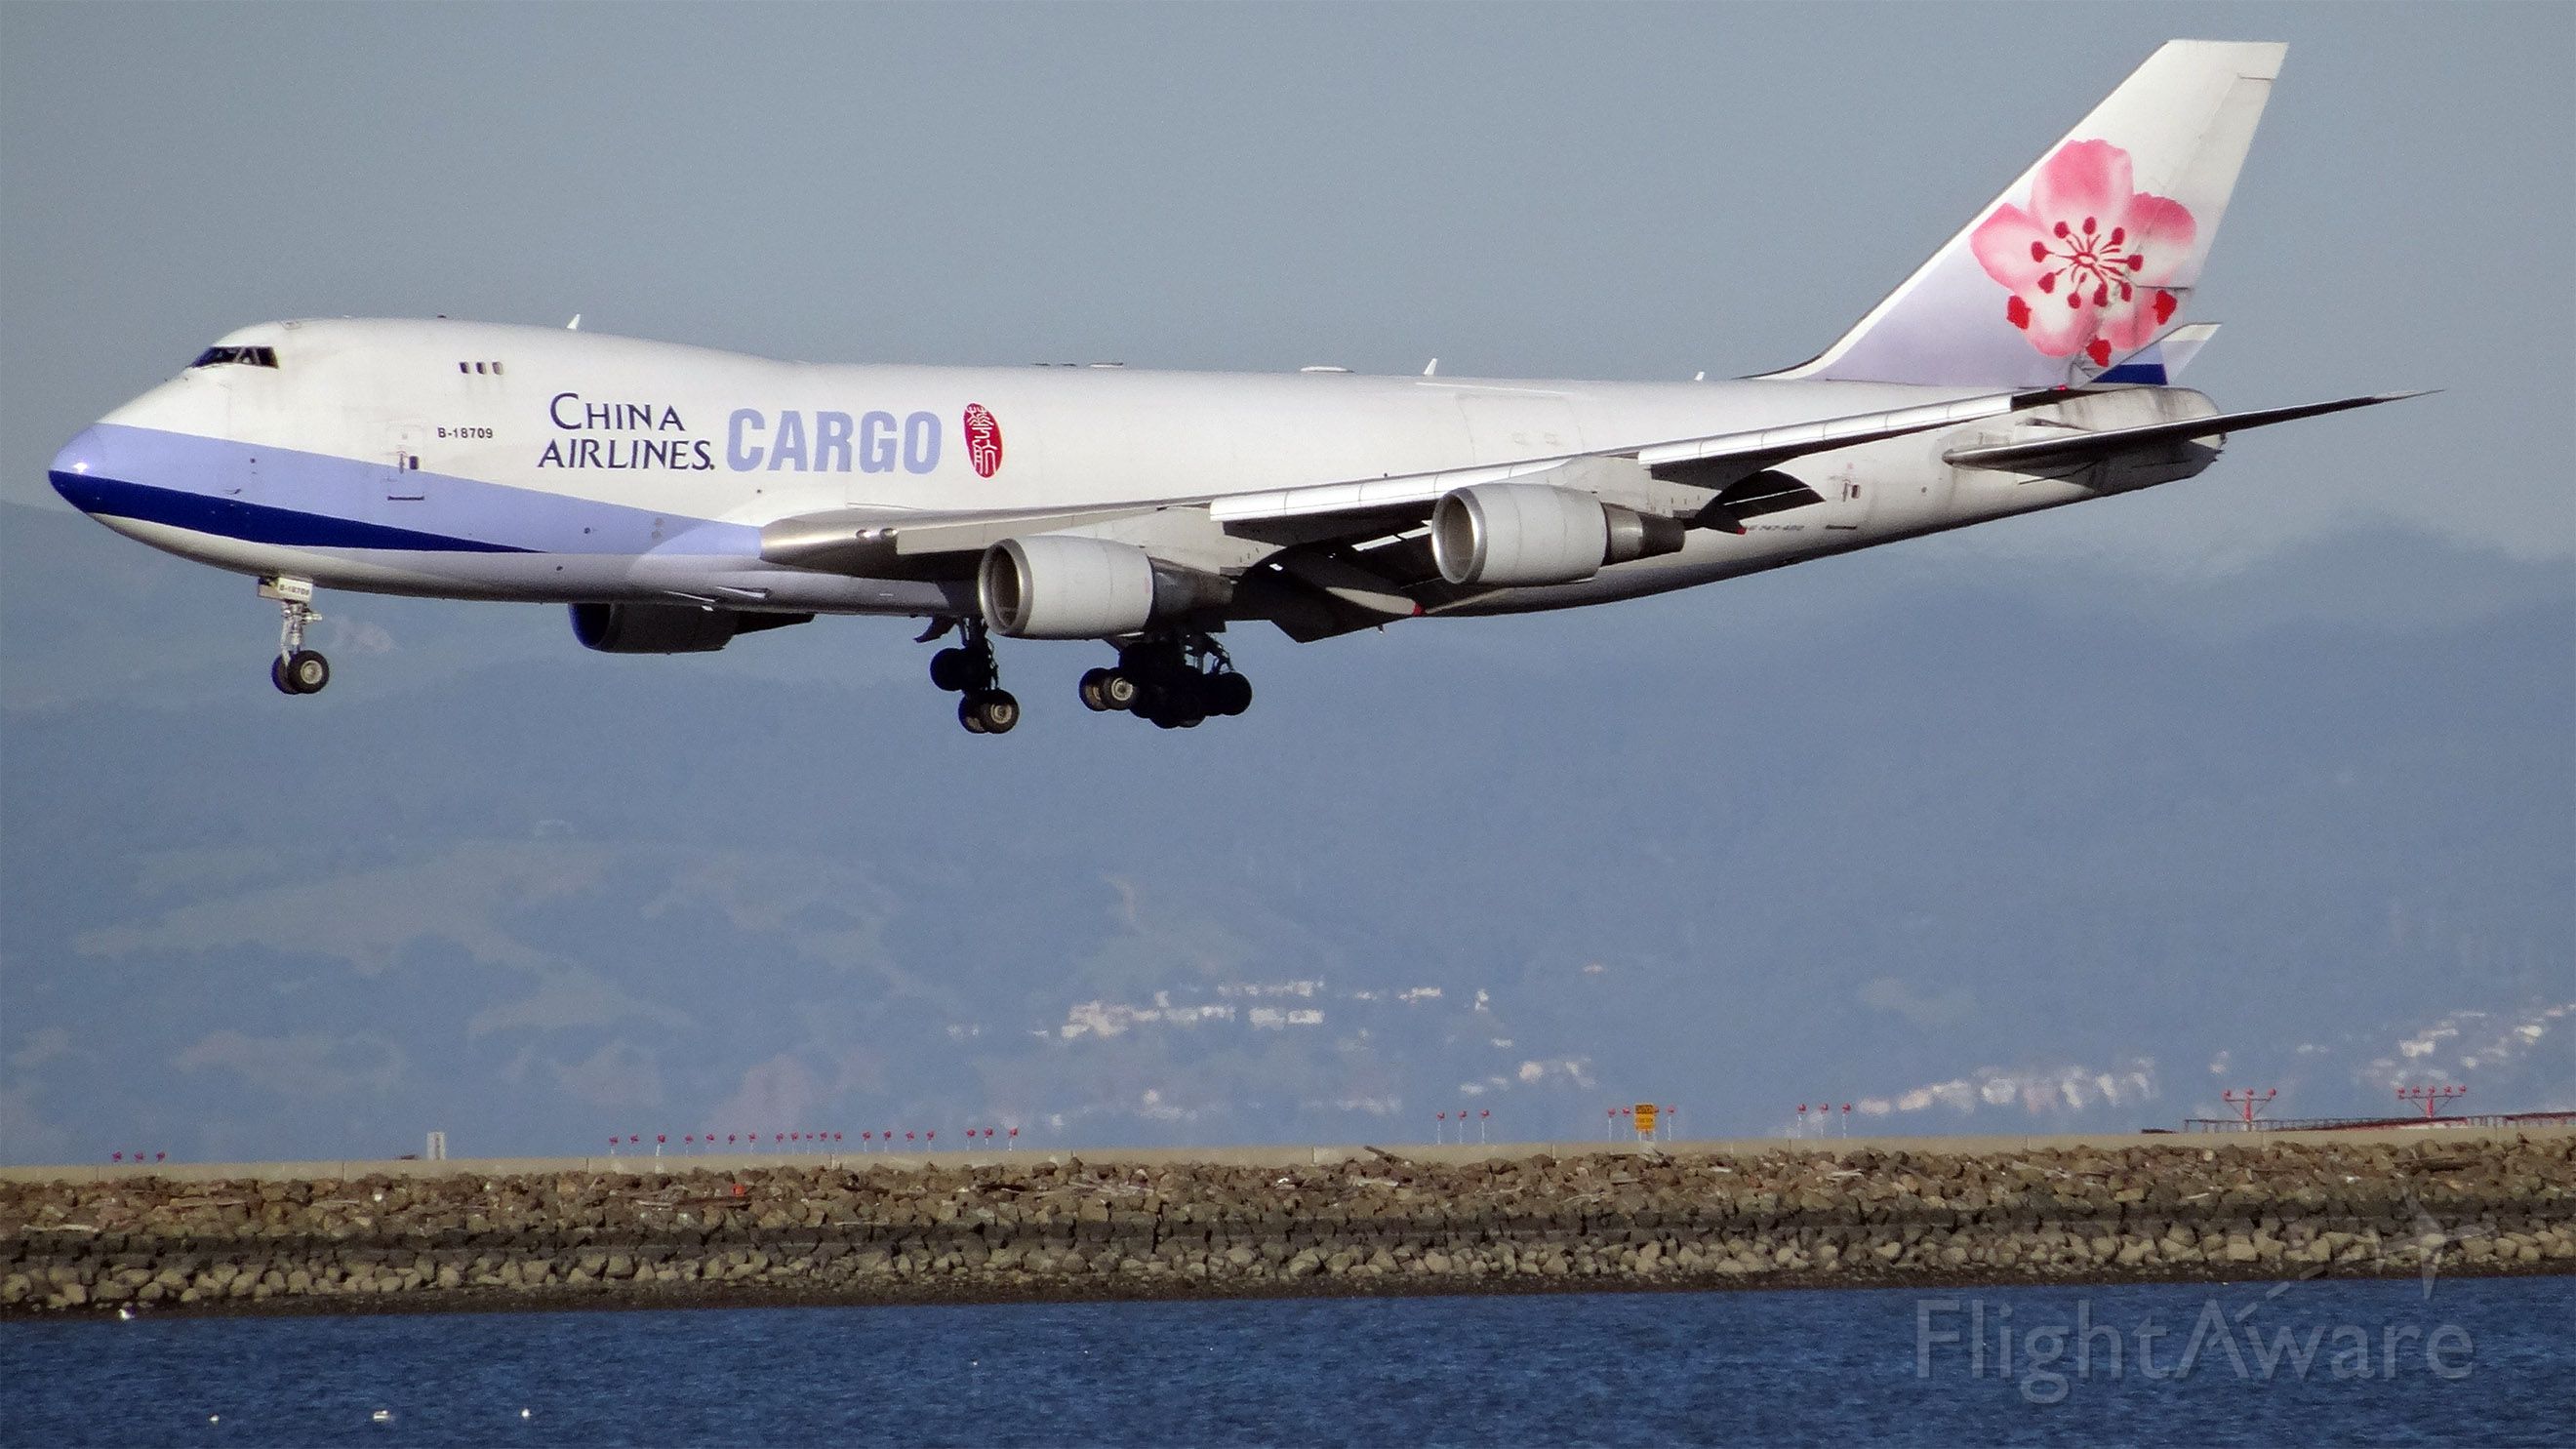 Boeing 747-400 (B-18709) - B-18709, Age: 13.2 Yearsbr /Boeing 747-400 (quad-jet) (H/B744/L)br /Airline: China Airlines, Engines: 4x CF6-80br /06-Mar-2015 B744/L Chicago OHare Intl (KORD) San Francisco Intl (KSFO) 14:45 CST 16:46 PST 4:00